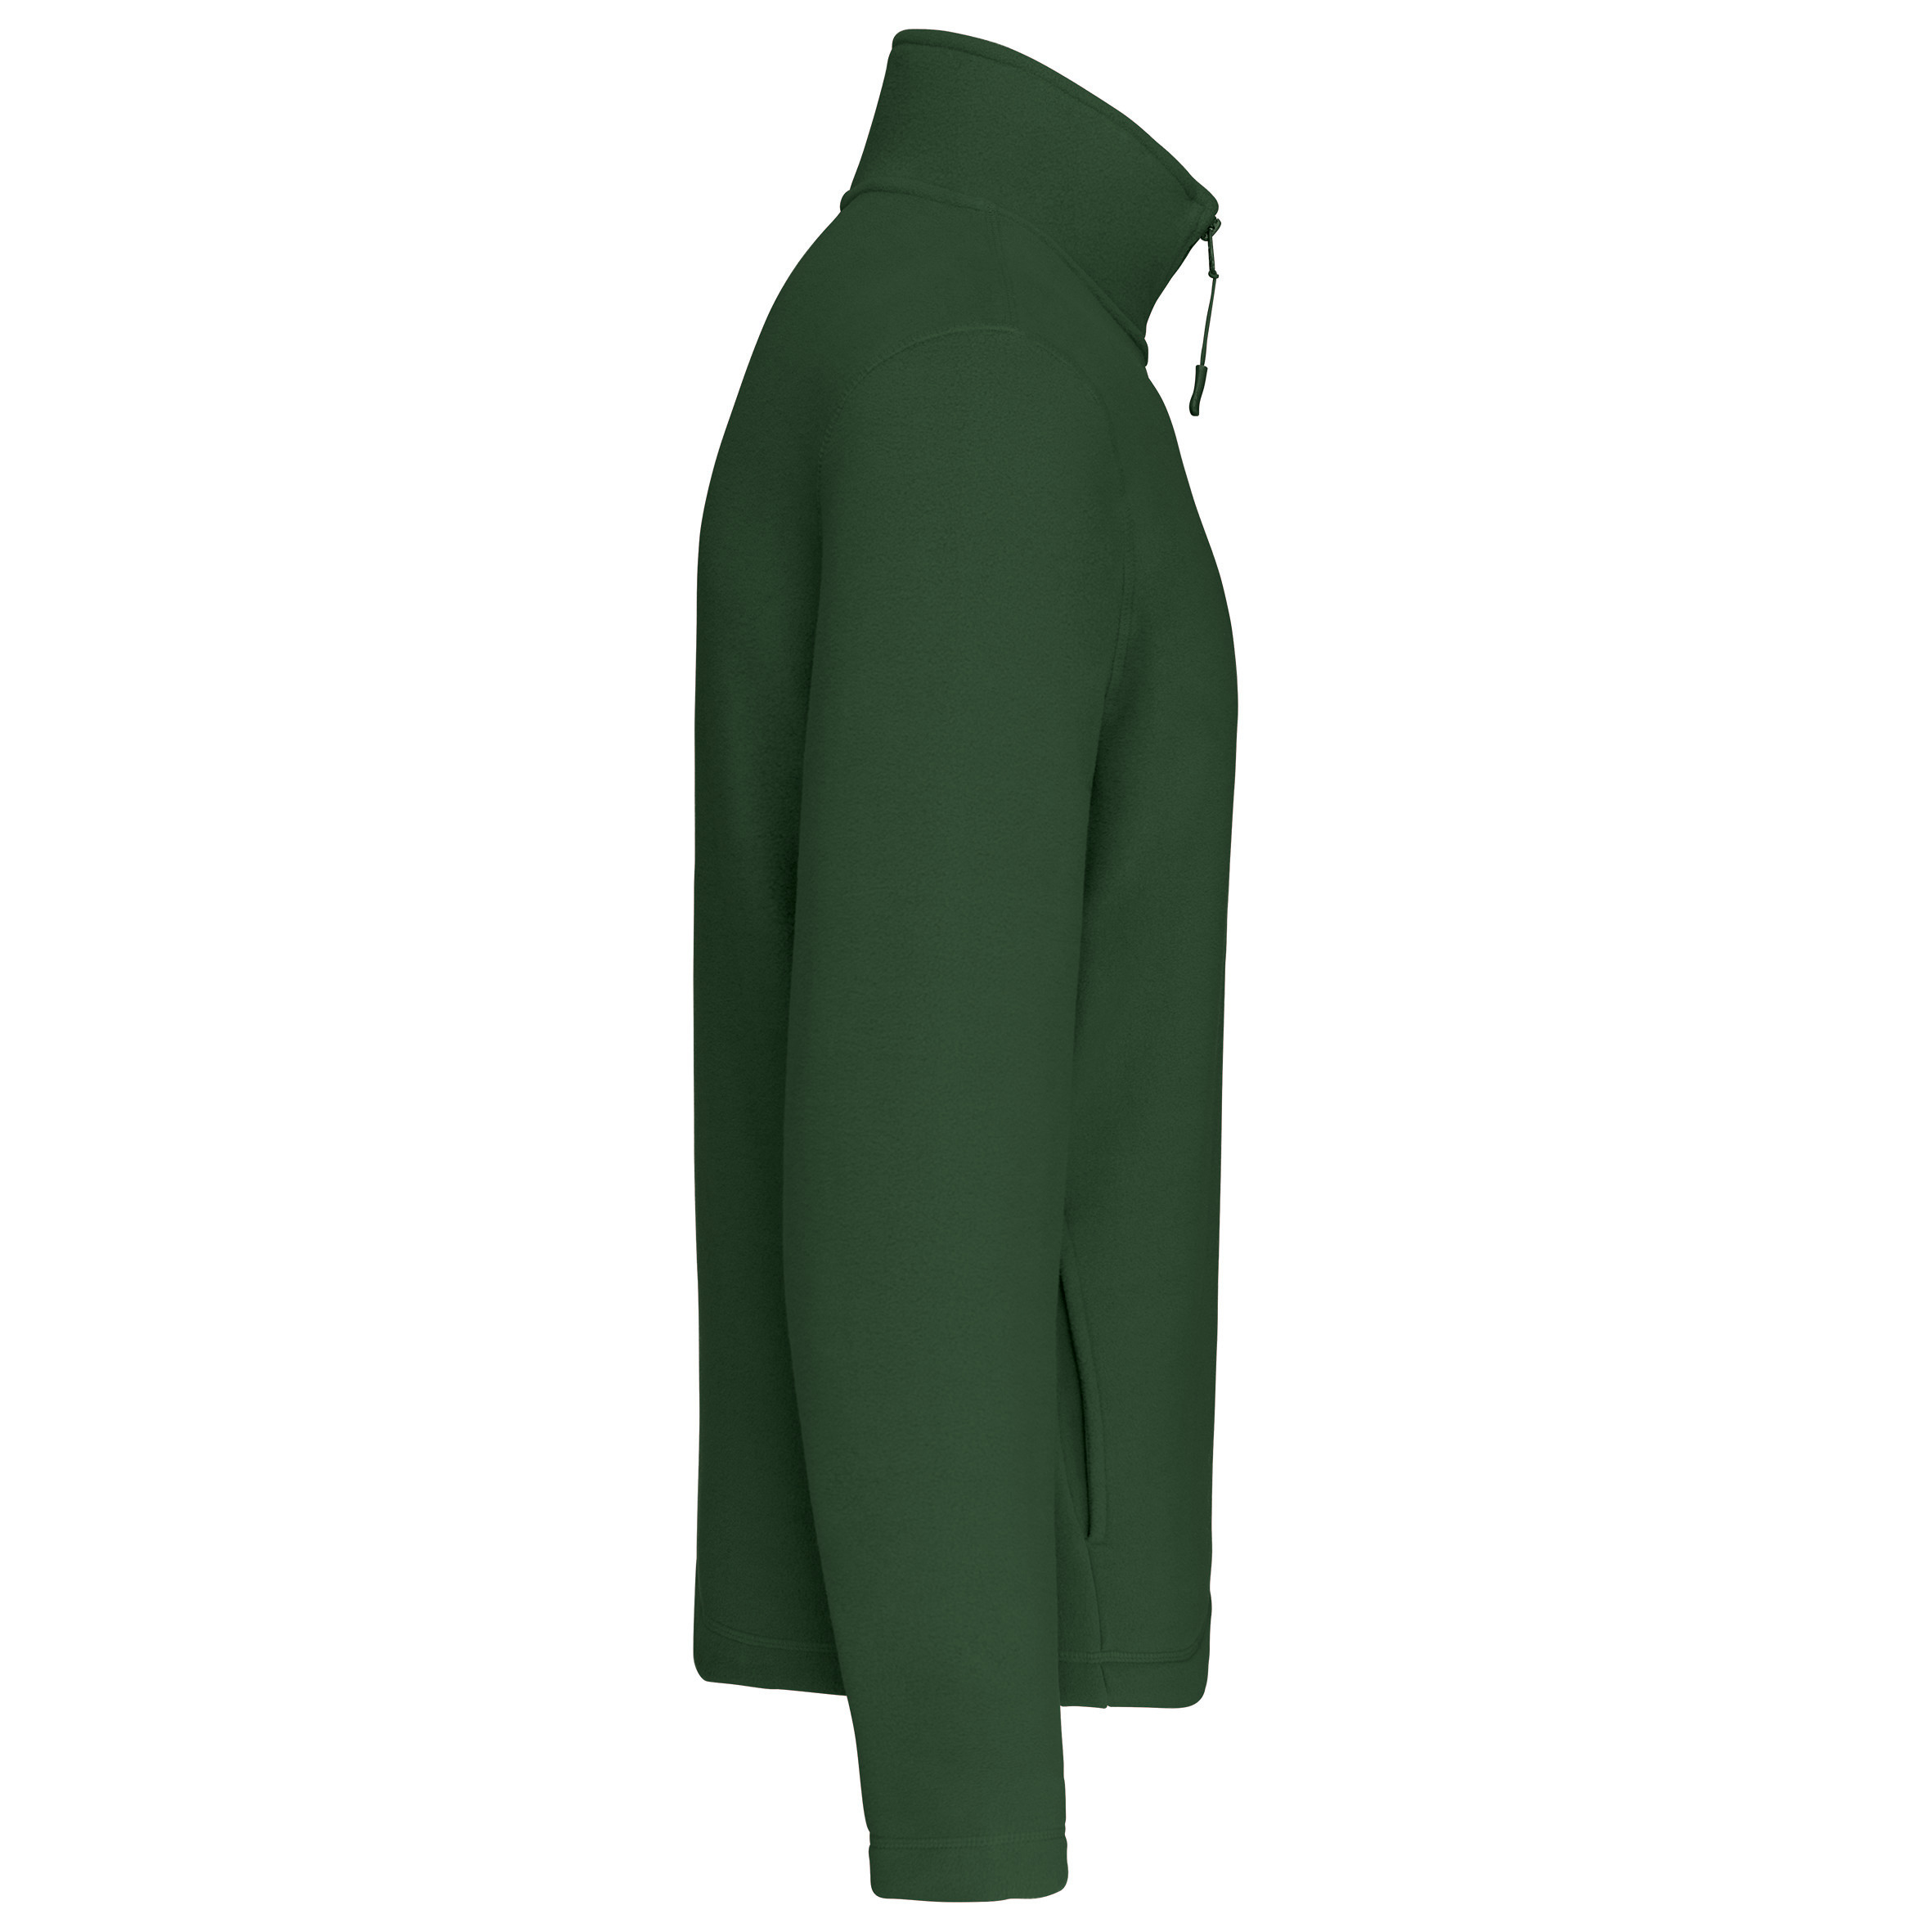 PS_K912-S_FORESTGREEN